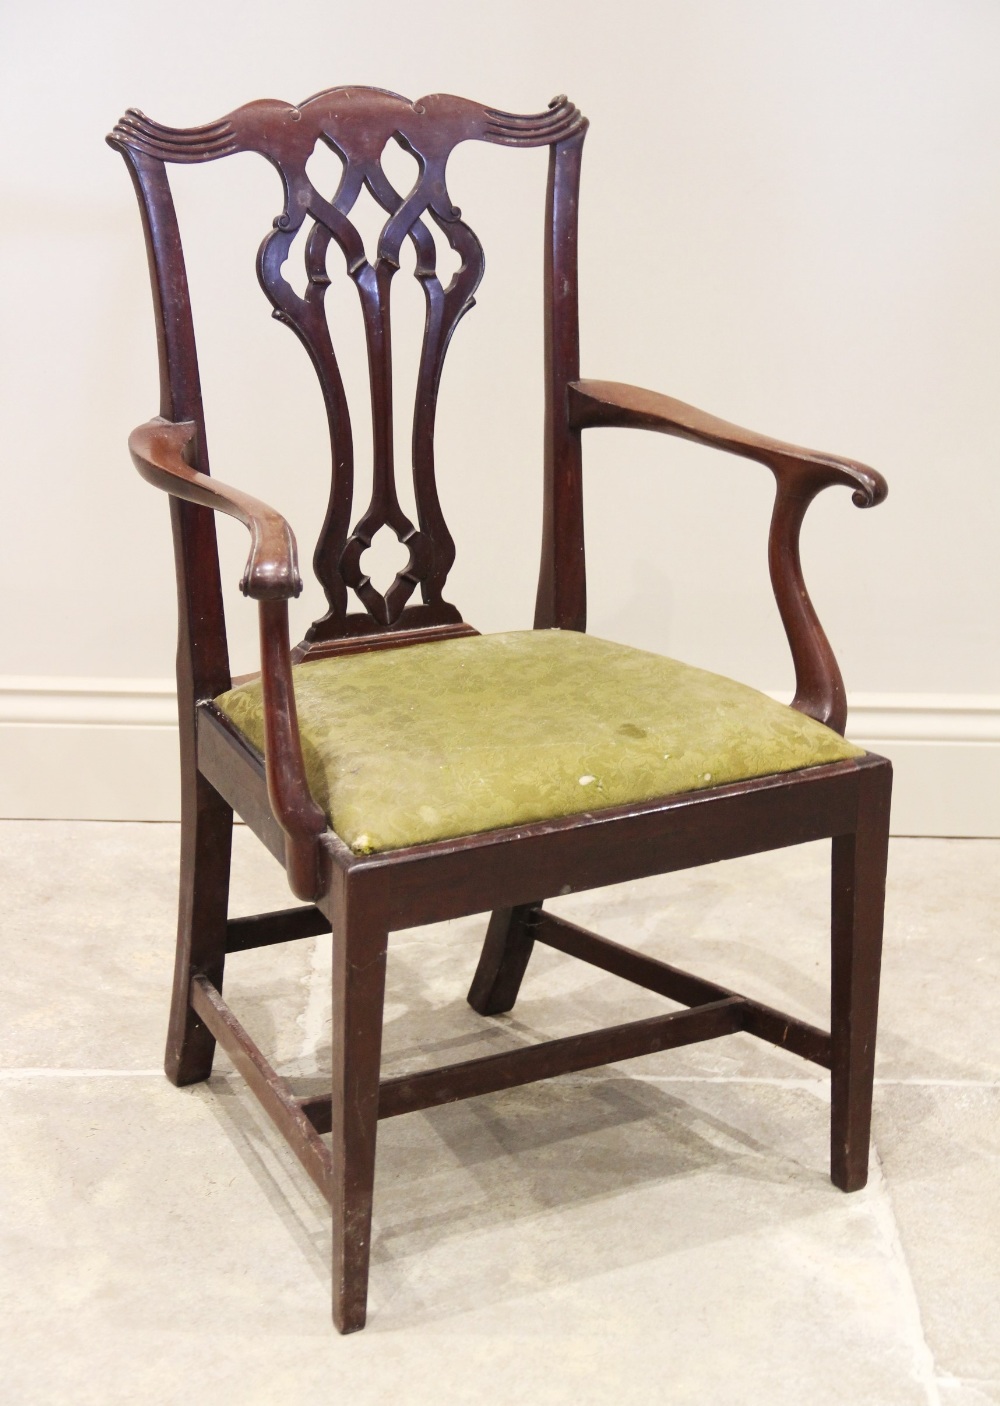 A 19th century Chippendale style mahogany child's elbow chair, the interlaced splat back extending